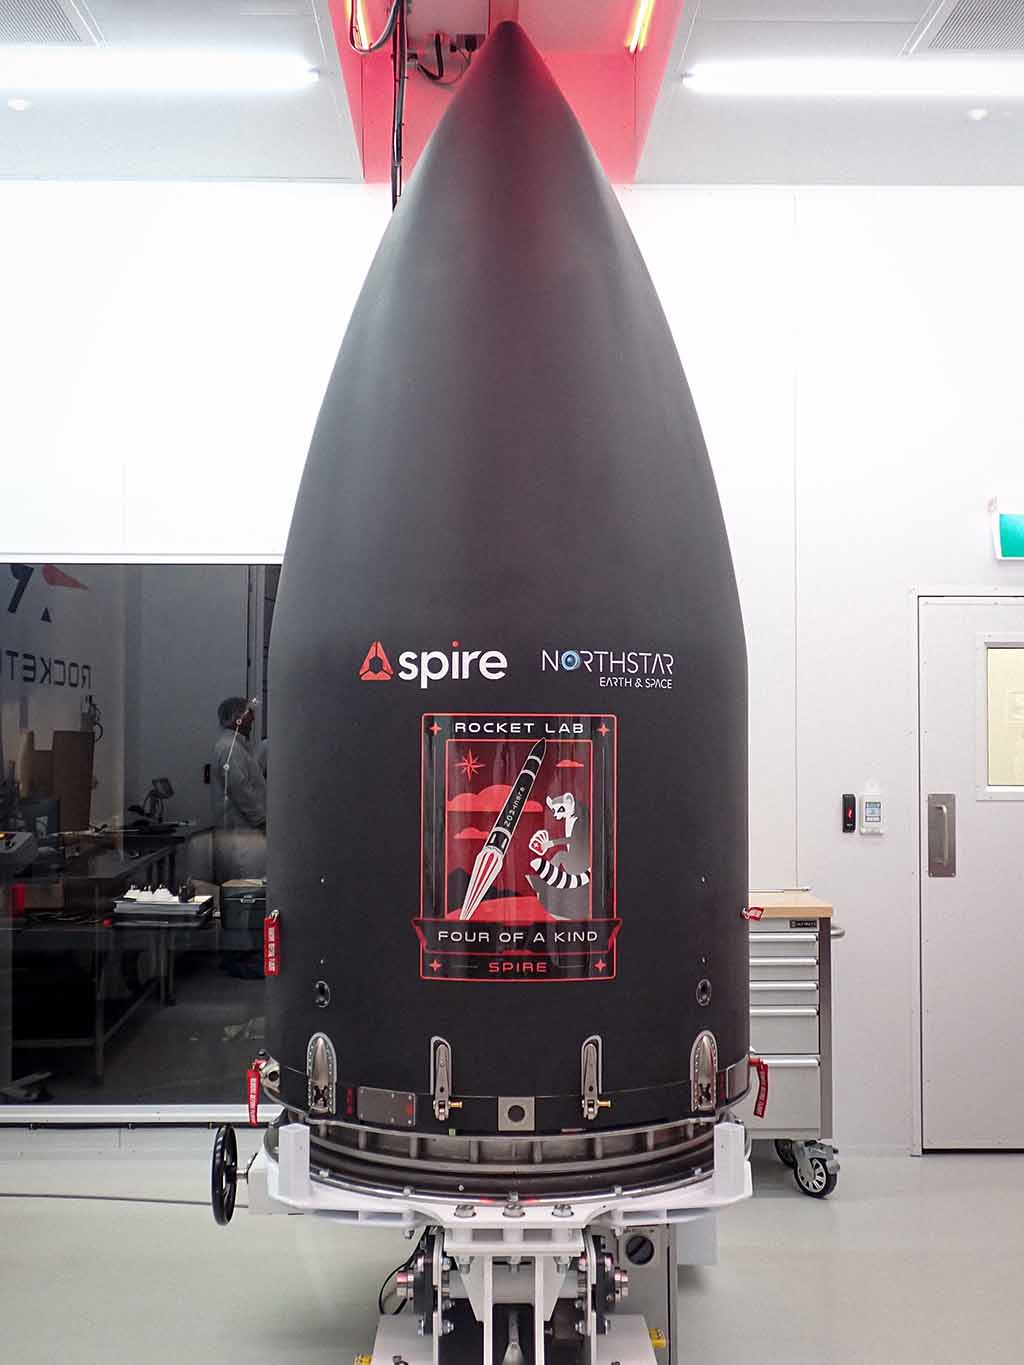 Rocket Lab's Electron Rocket payload with 4 SSA satellites from Spire and Northstar